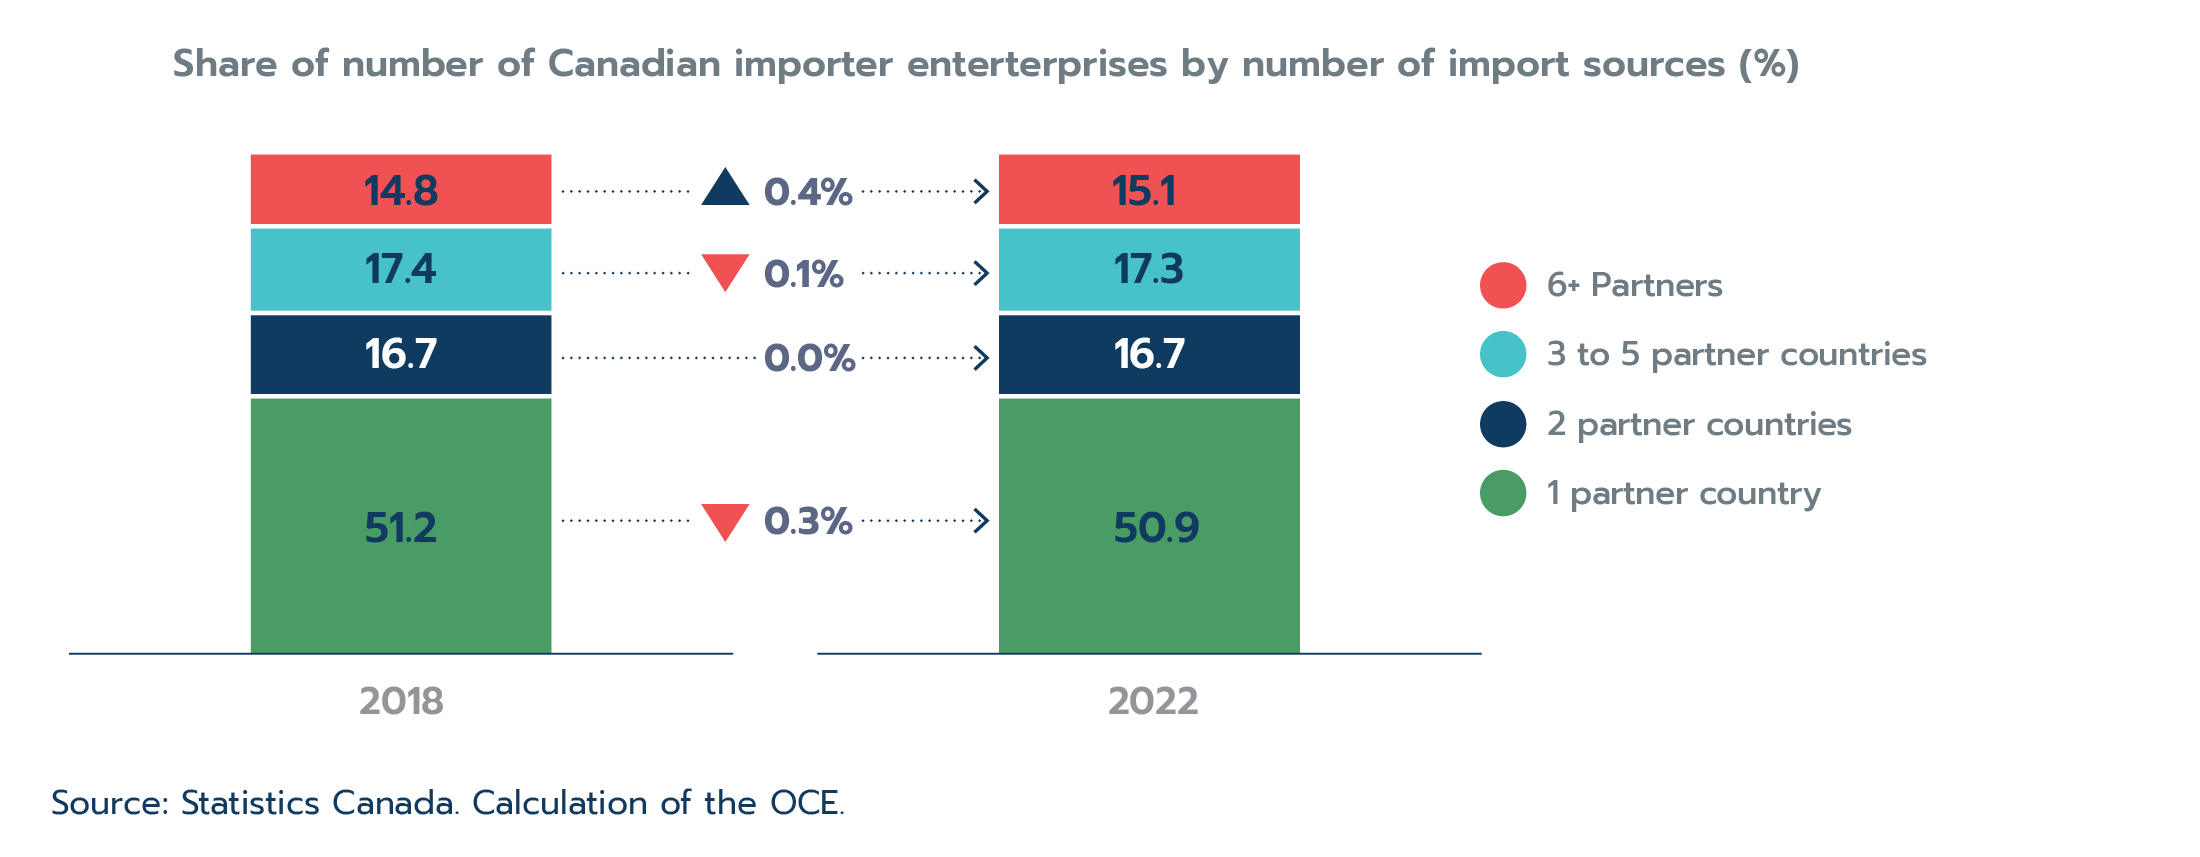 Figure 2.14: Share of number of Canadian importer enterprises by number of import sources